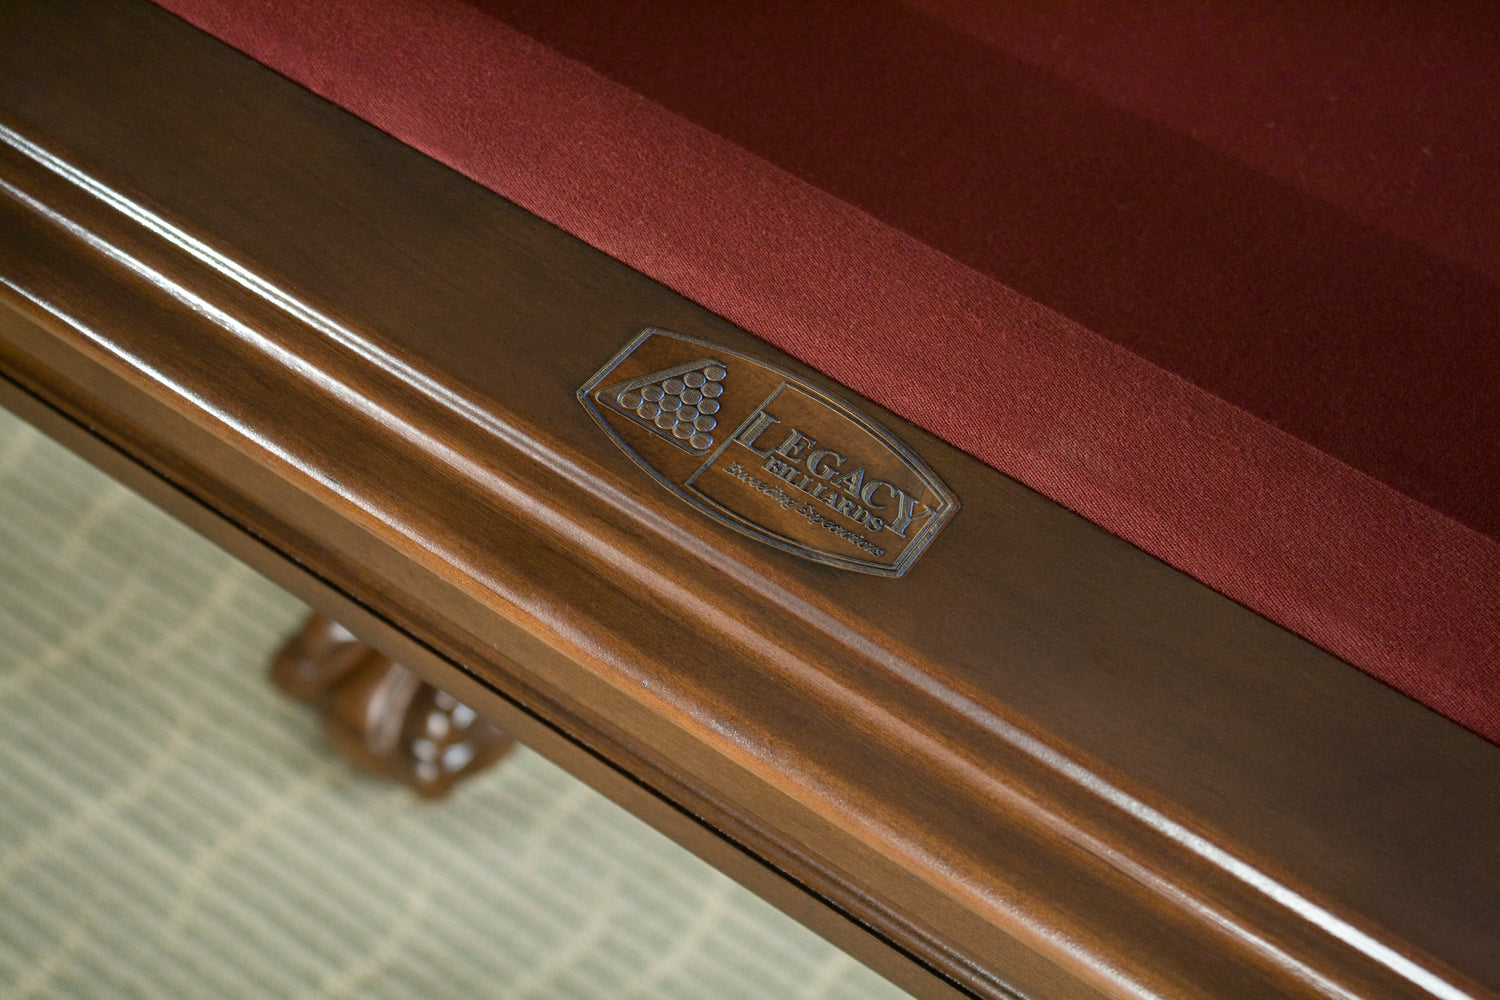 Rail Cushion Profiles: Which is Best for Your Pool Table?